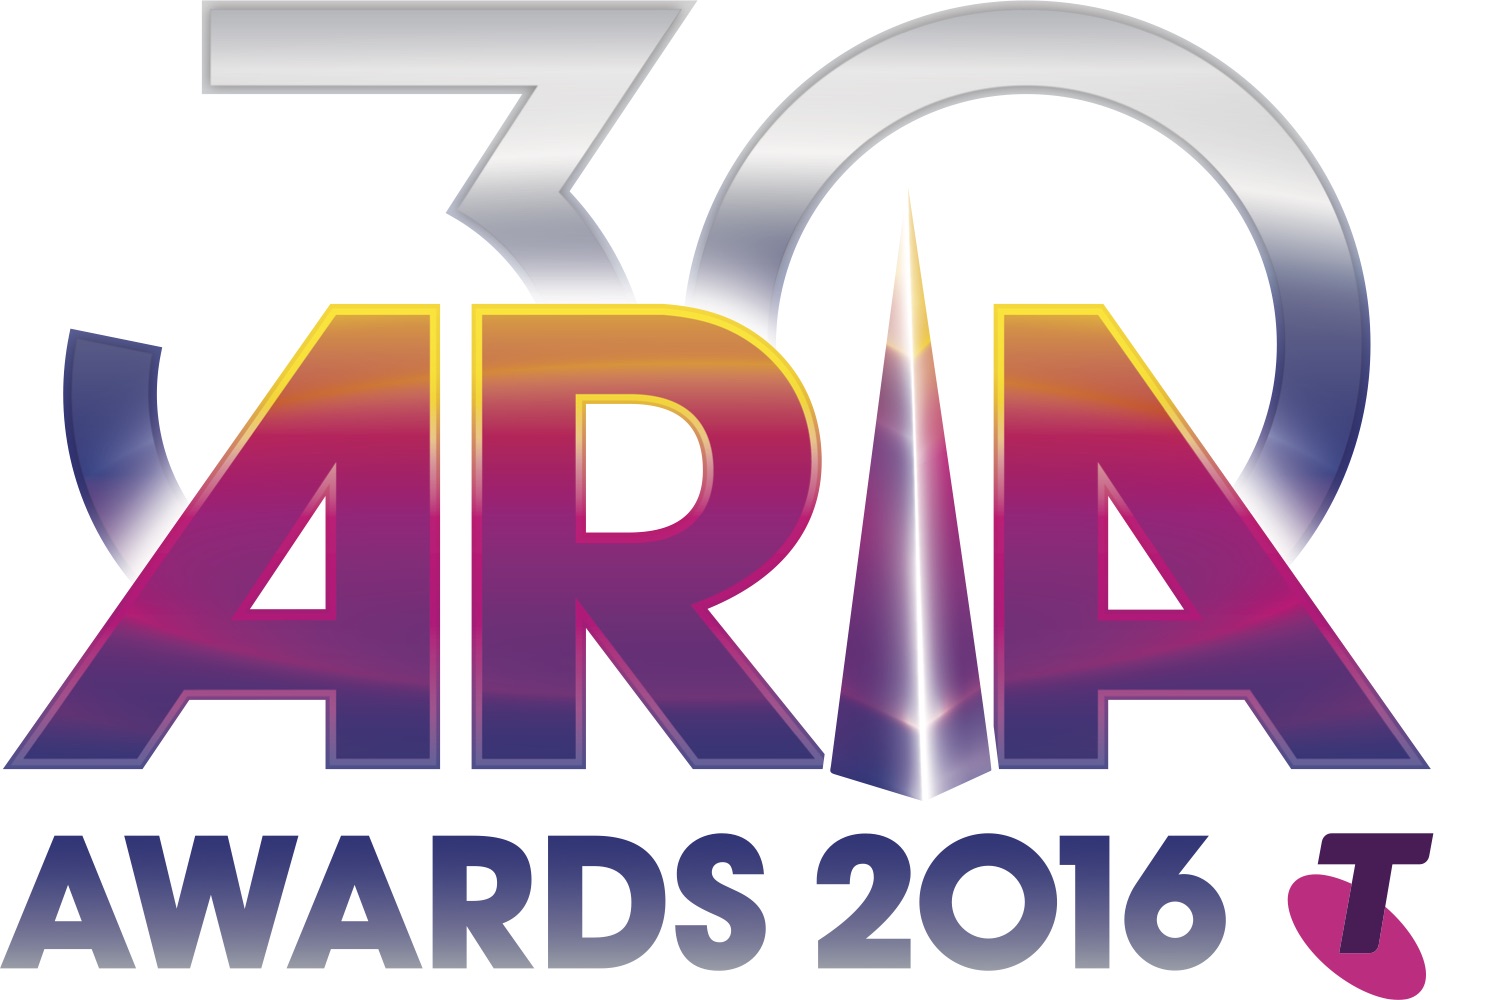 Initial details announced for 30th annual ARIA Awards